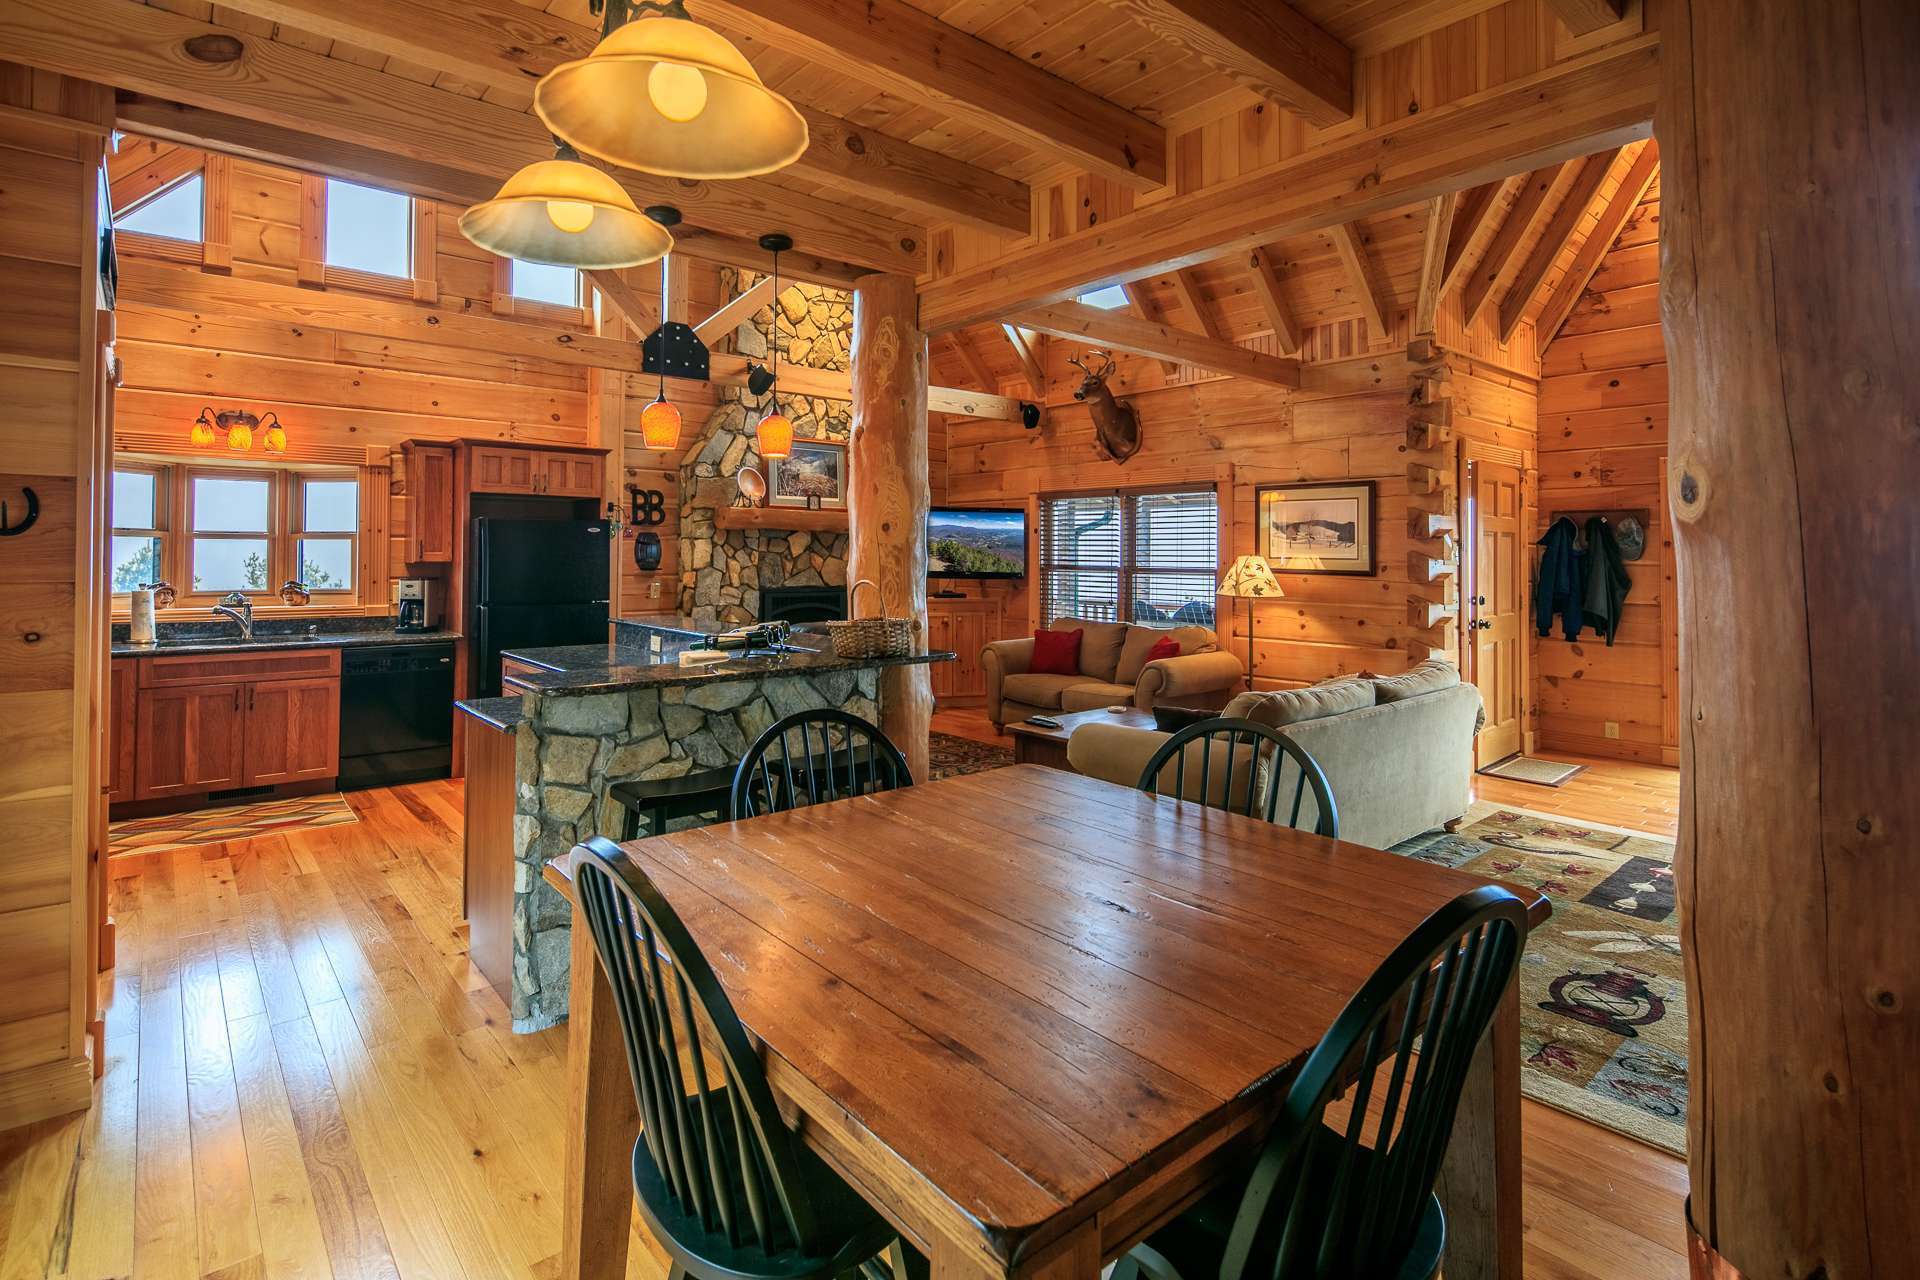 The dining area is placed to enjoy the views and easy access to the back deck.